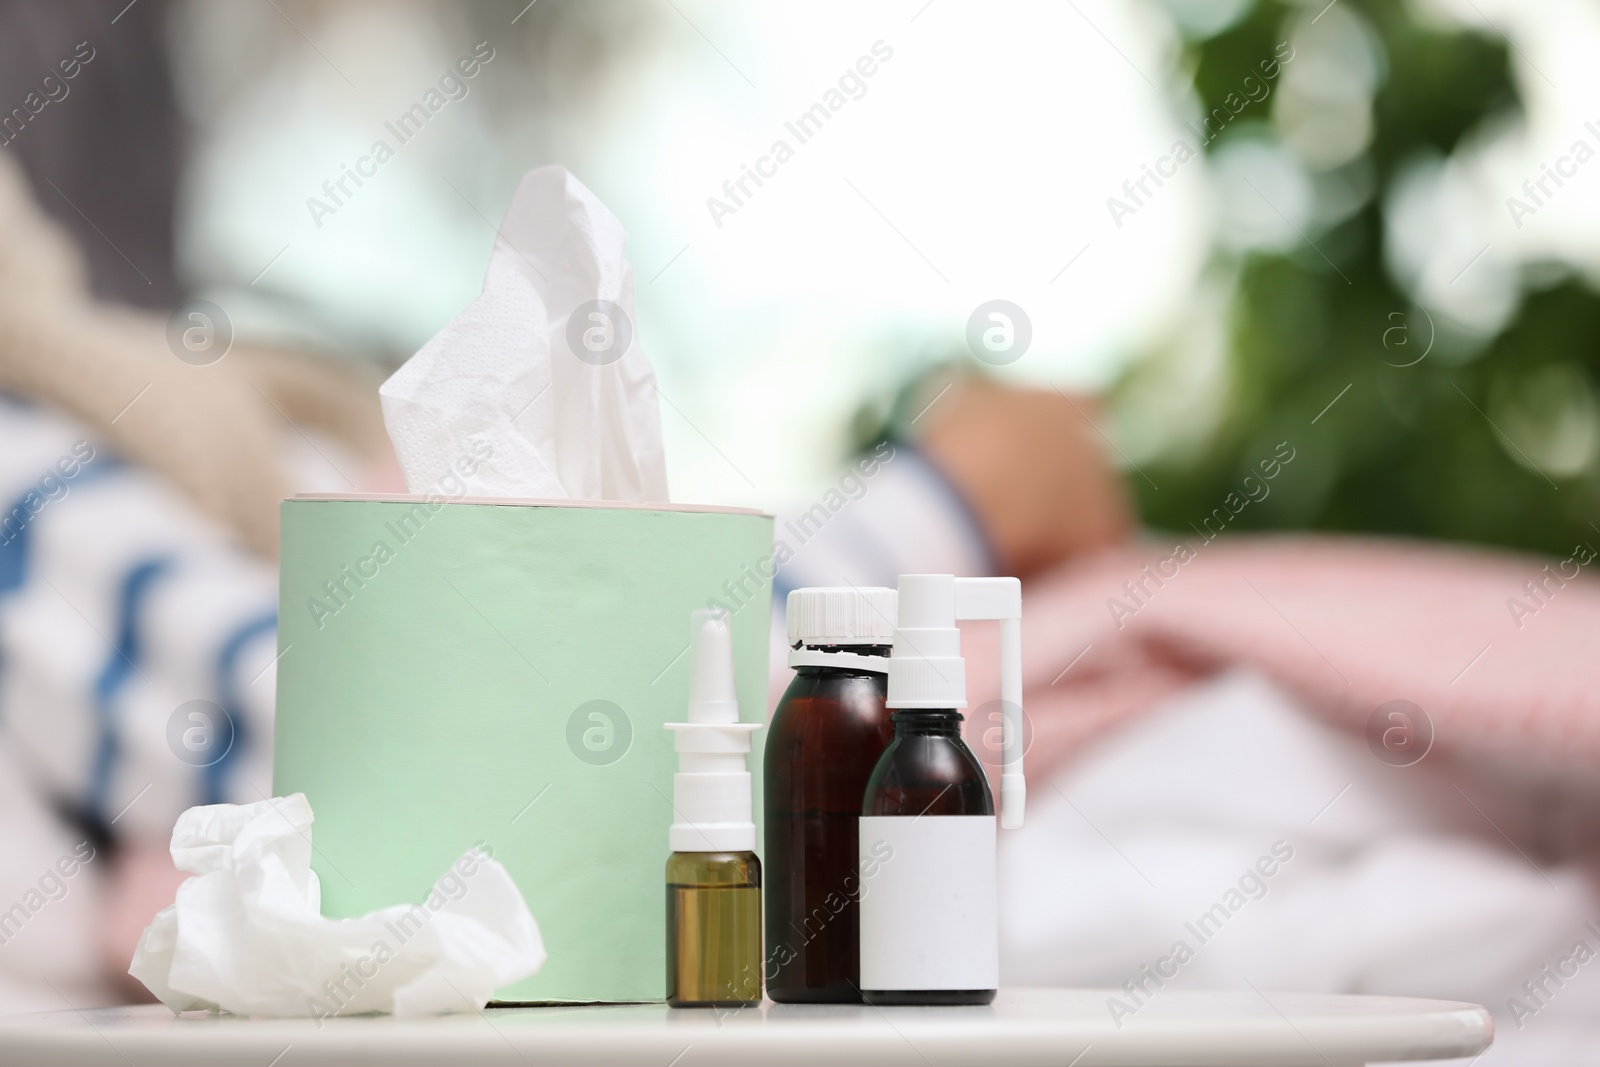 Photo of Cough remedies and box with tissues on table